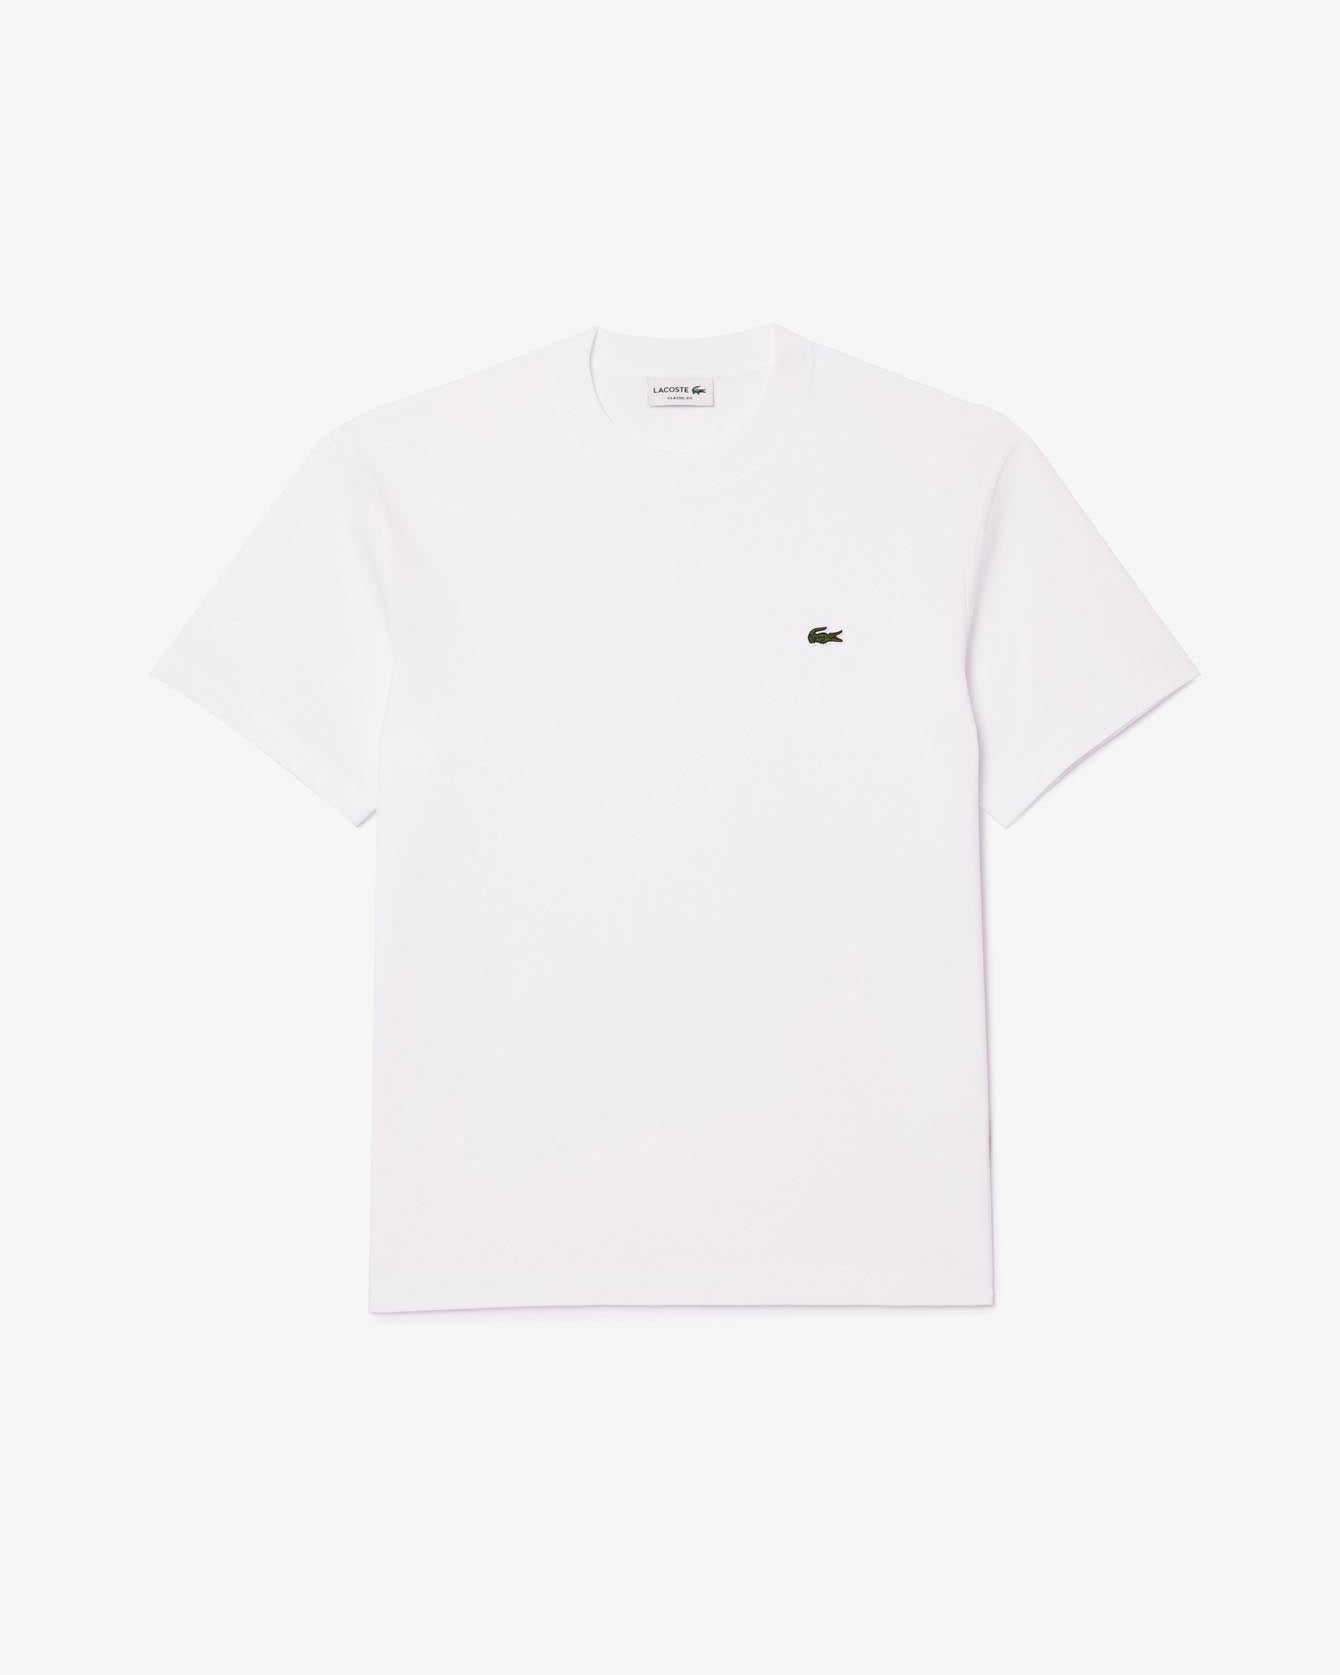 Classic Fit Tee White